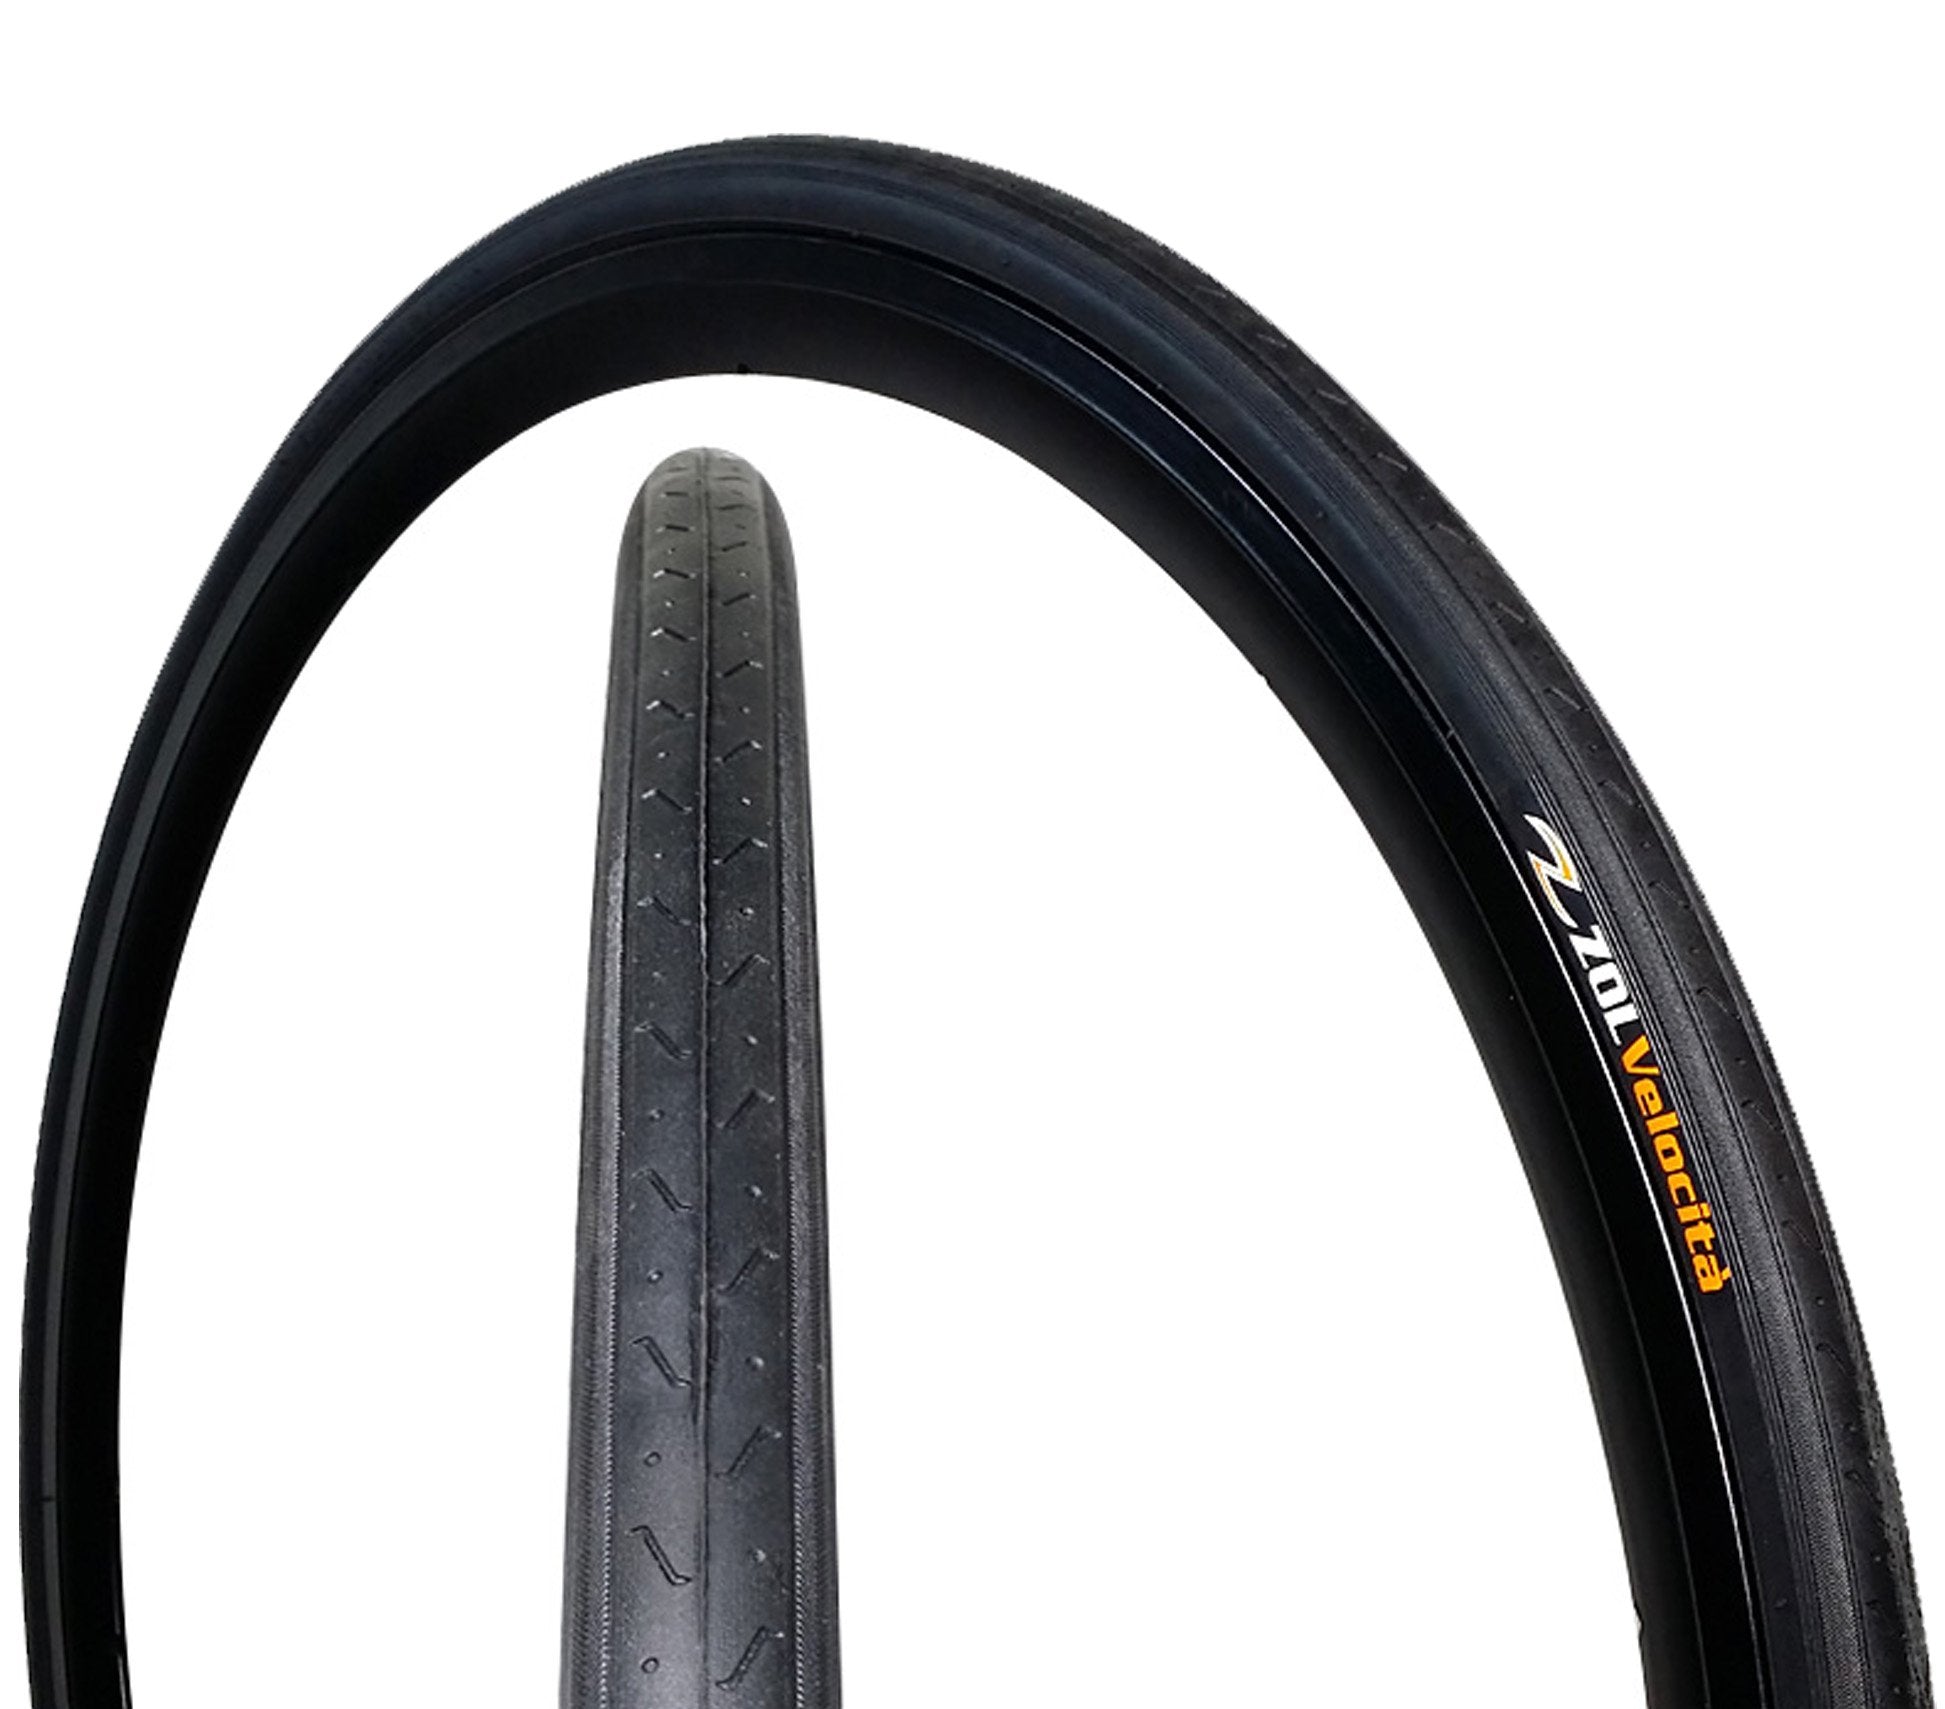 ZOL Bundle Pack Z1179 Road Tires and Tube 700x23C, Presta/French 60 MM Valve - Zol Cycling